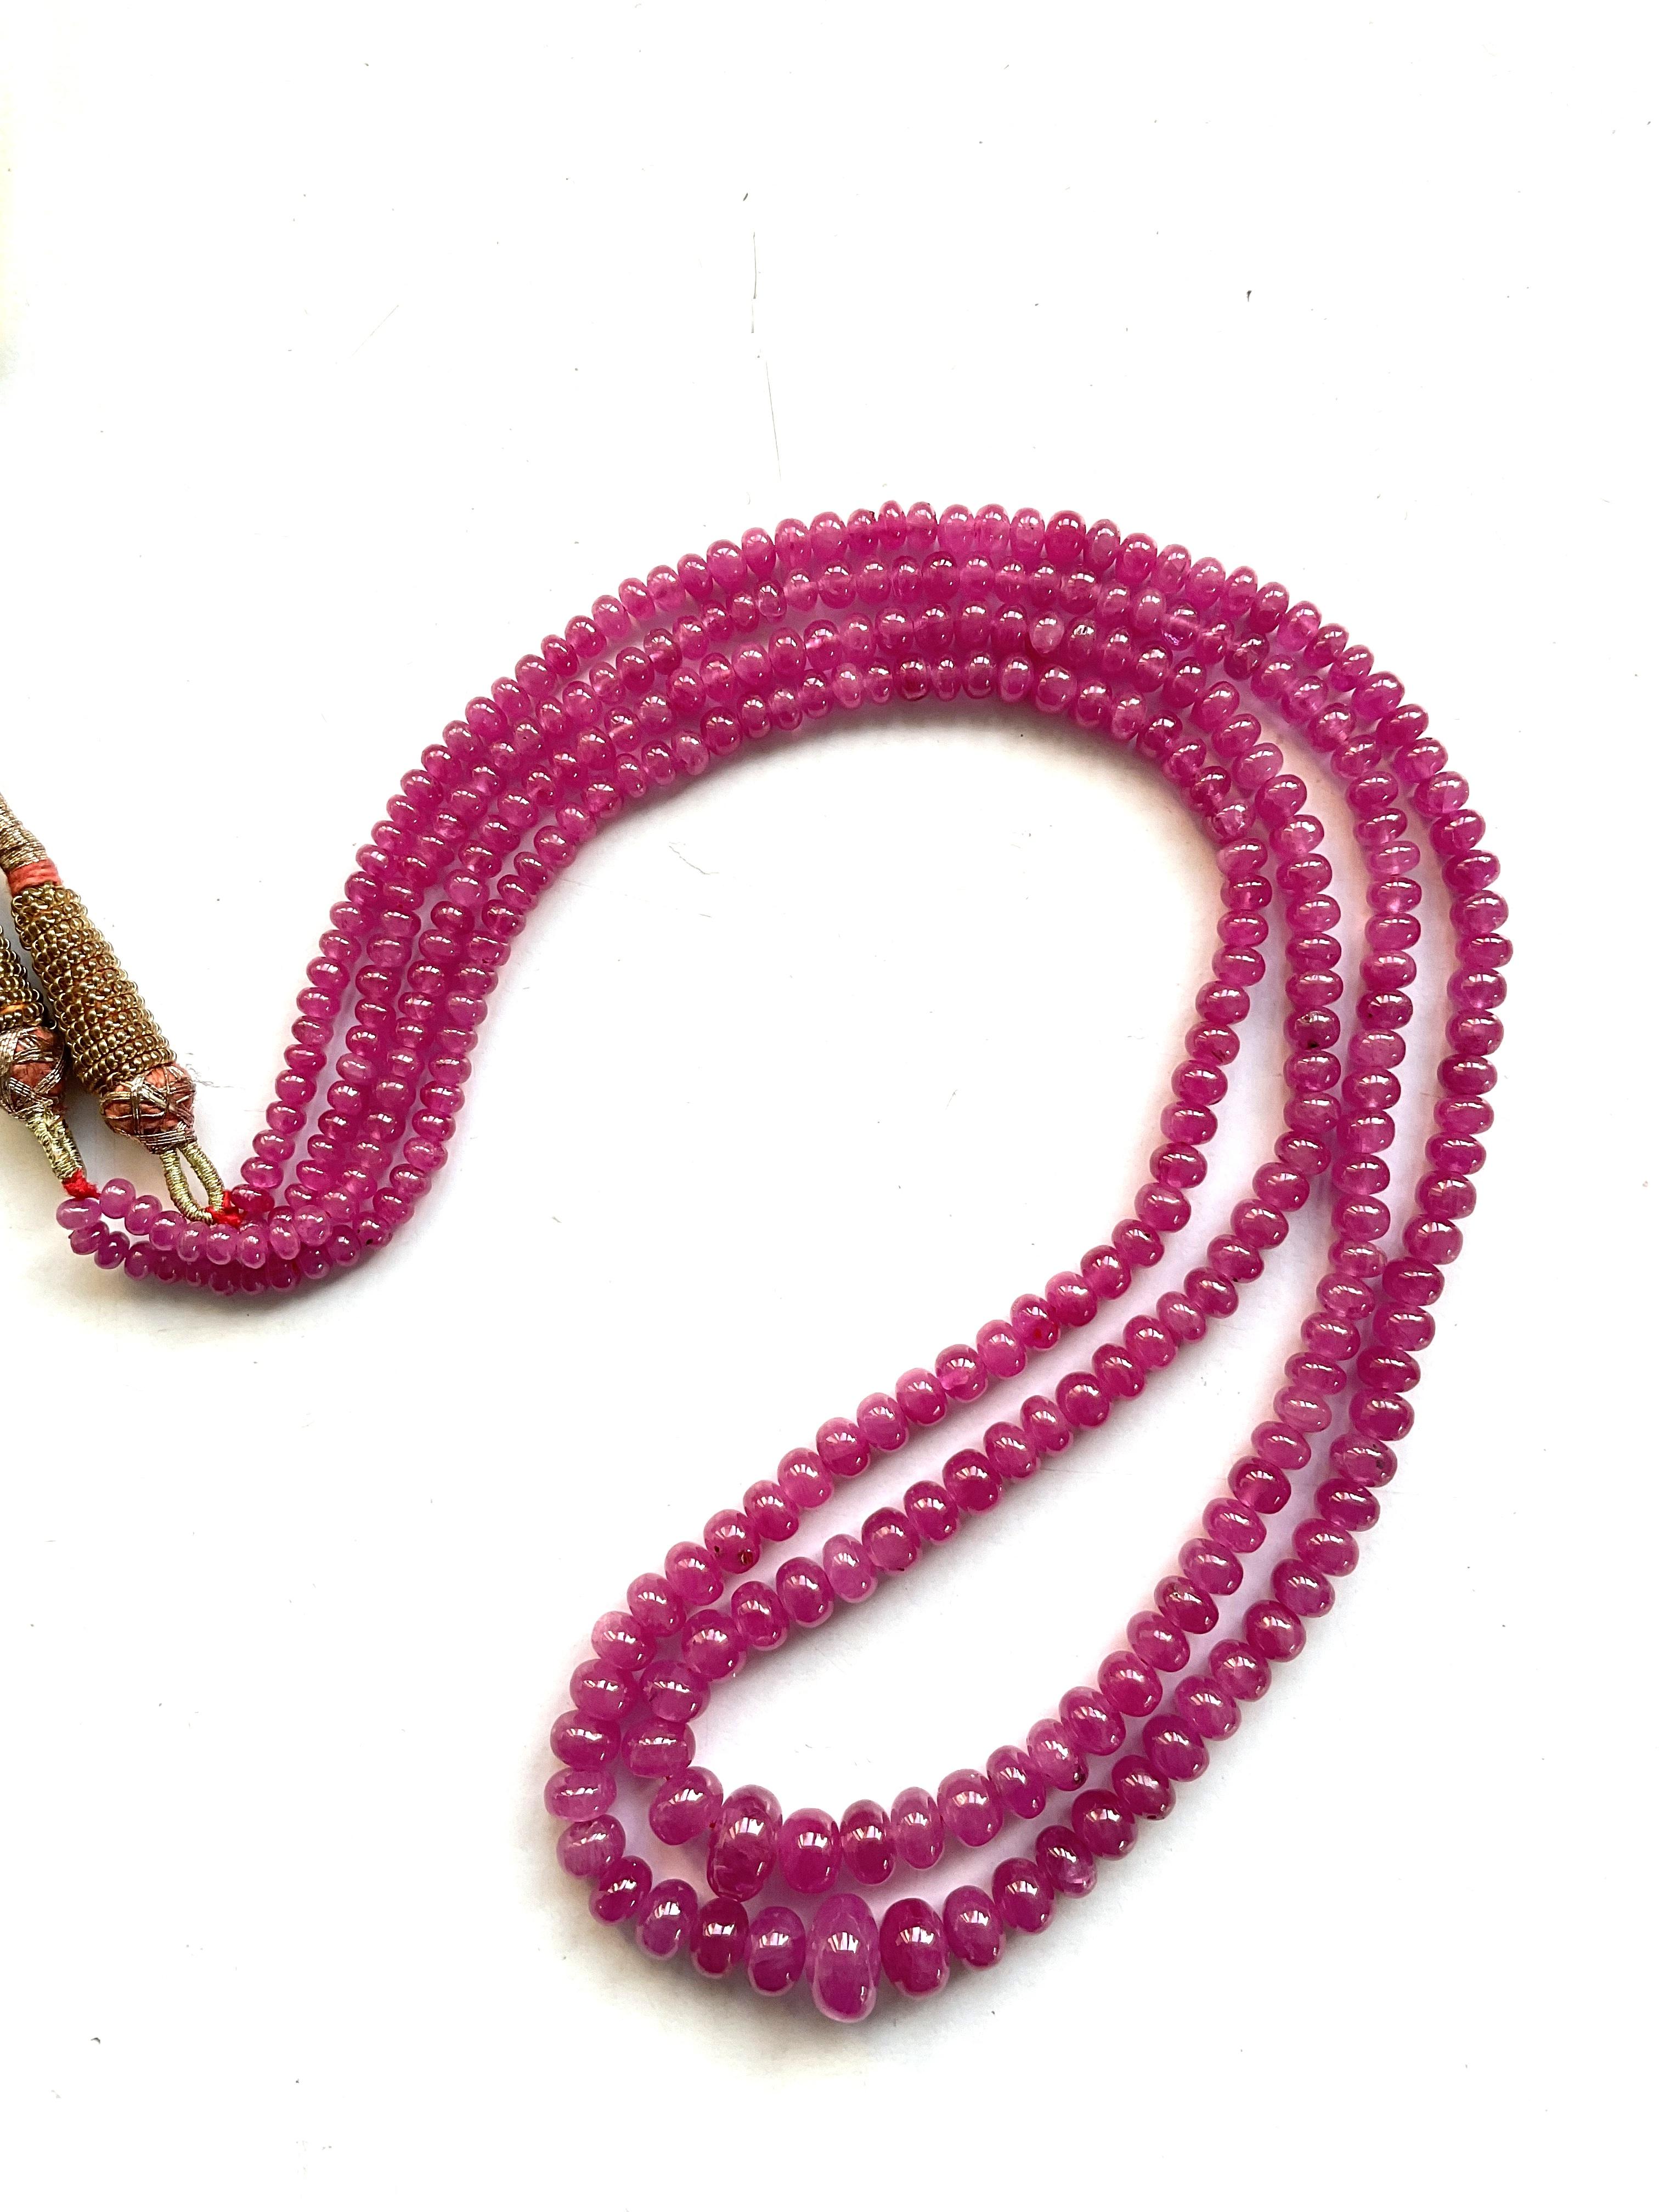 Art Deco 179.32 Carats Burma Ruby Heated Beaded Necklace Top Quality Natural Gemstone